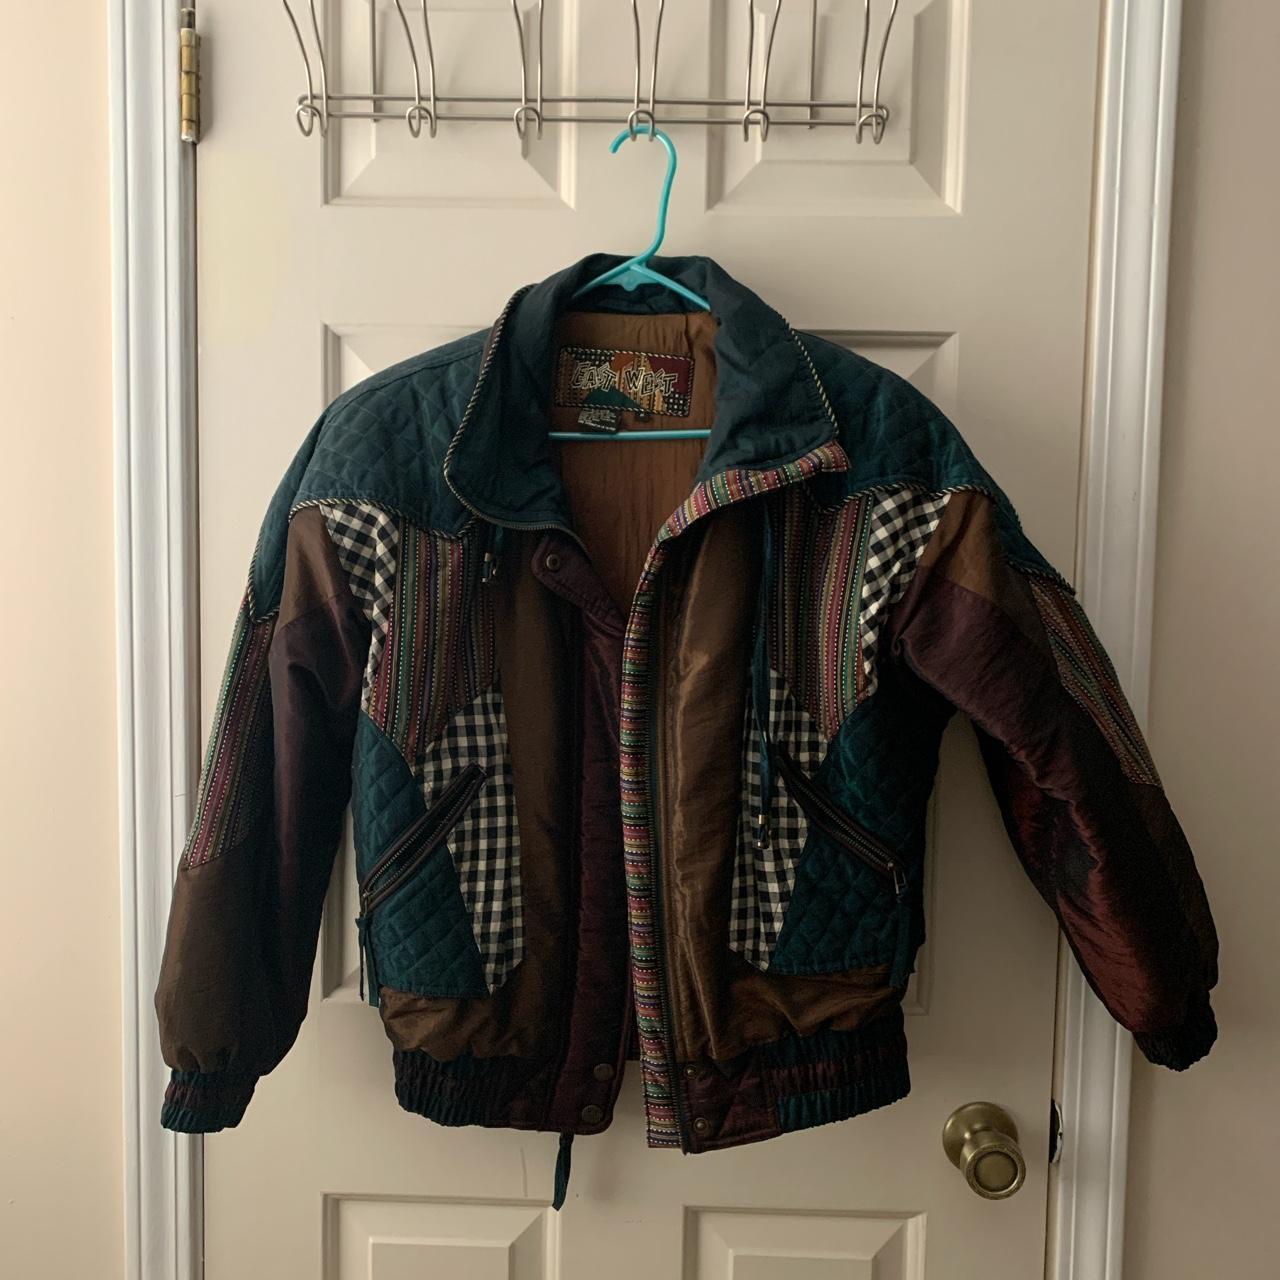 East West Men's Brown and Green Jacket